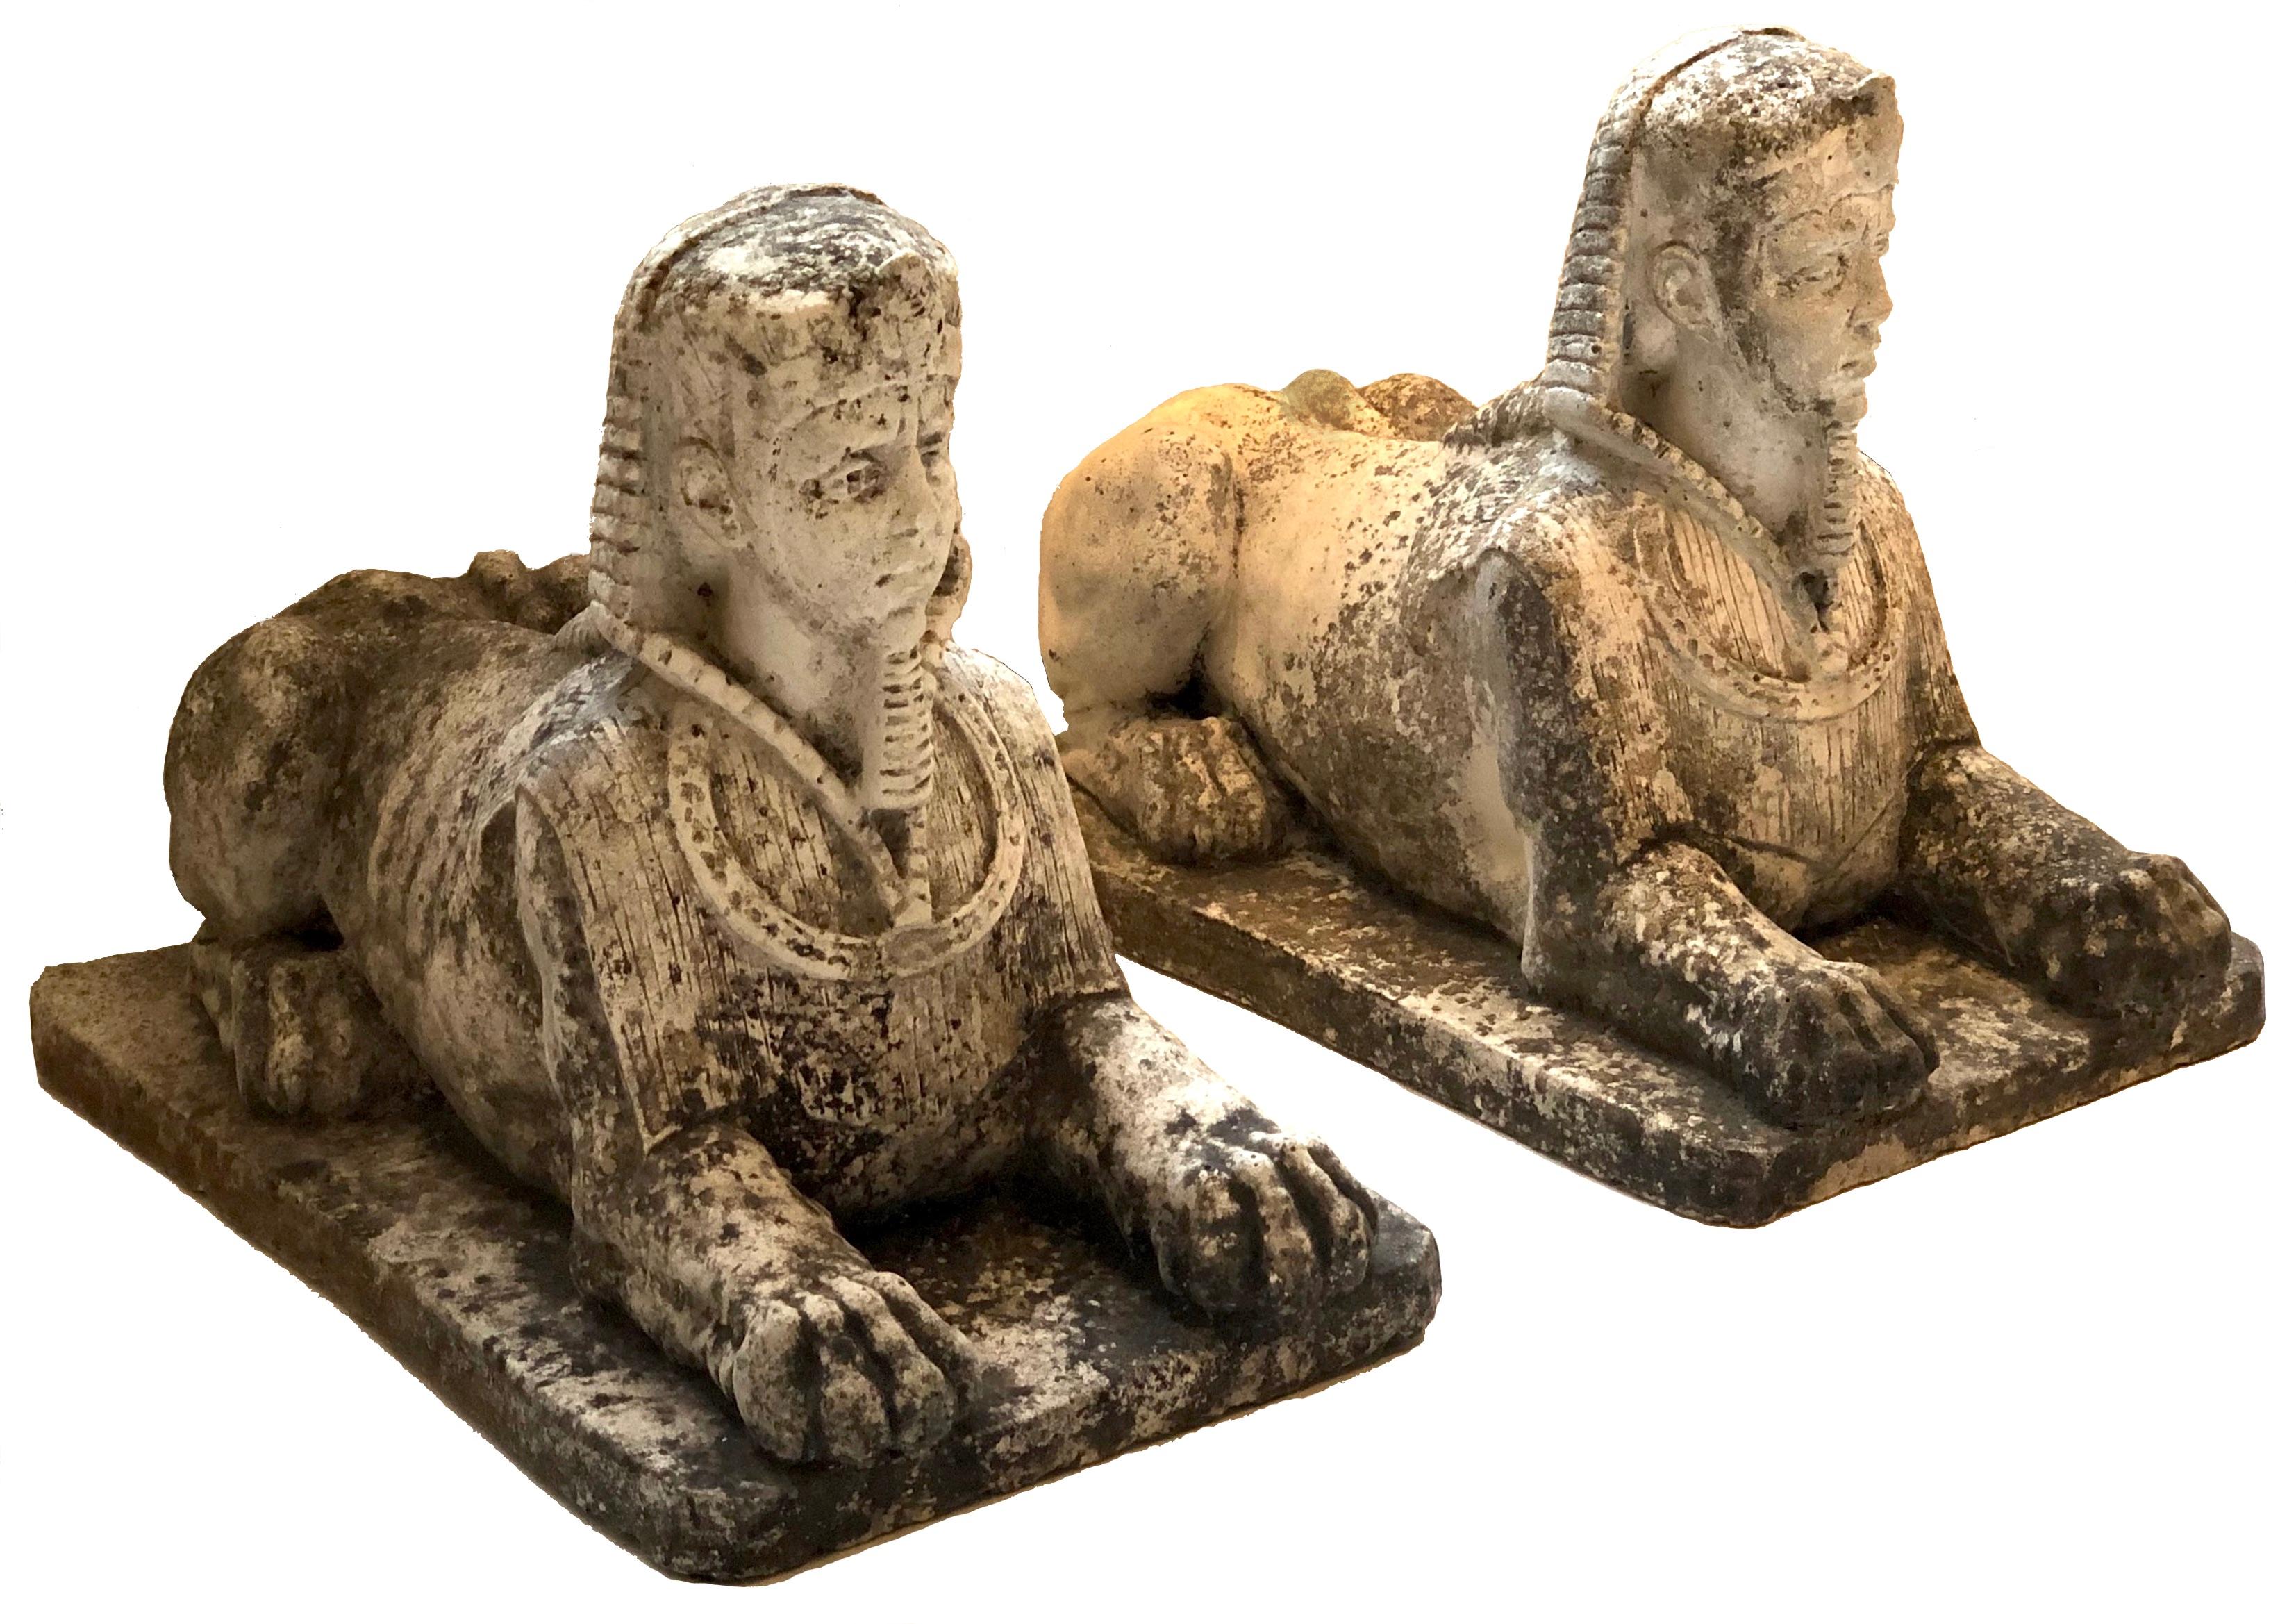 This pair of stylish garden ornaments is designed as sphinxes with the heads of pharaohs. They are seated on a rectangular base. They were made out of cast stone in Italy, earth 20th century. 

Measures: Length 44 cm.